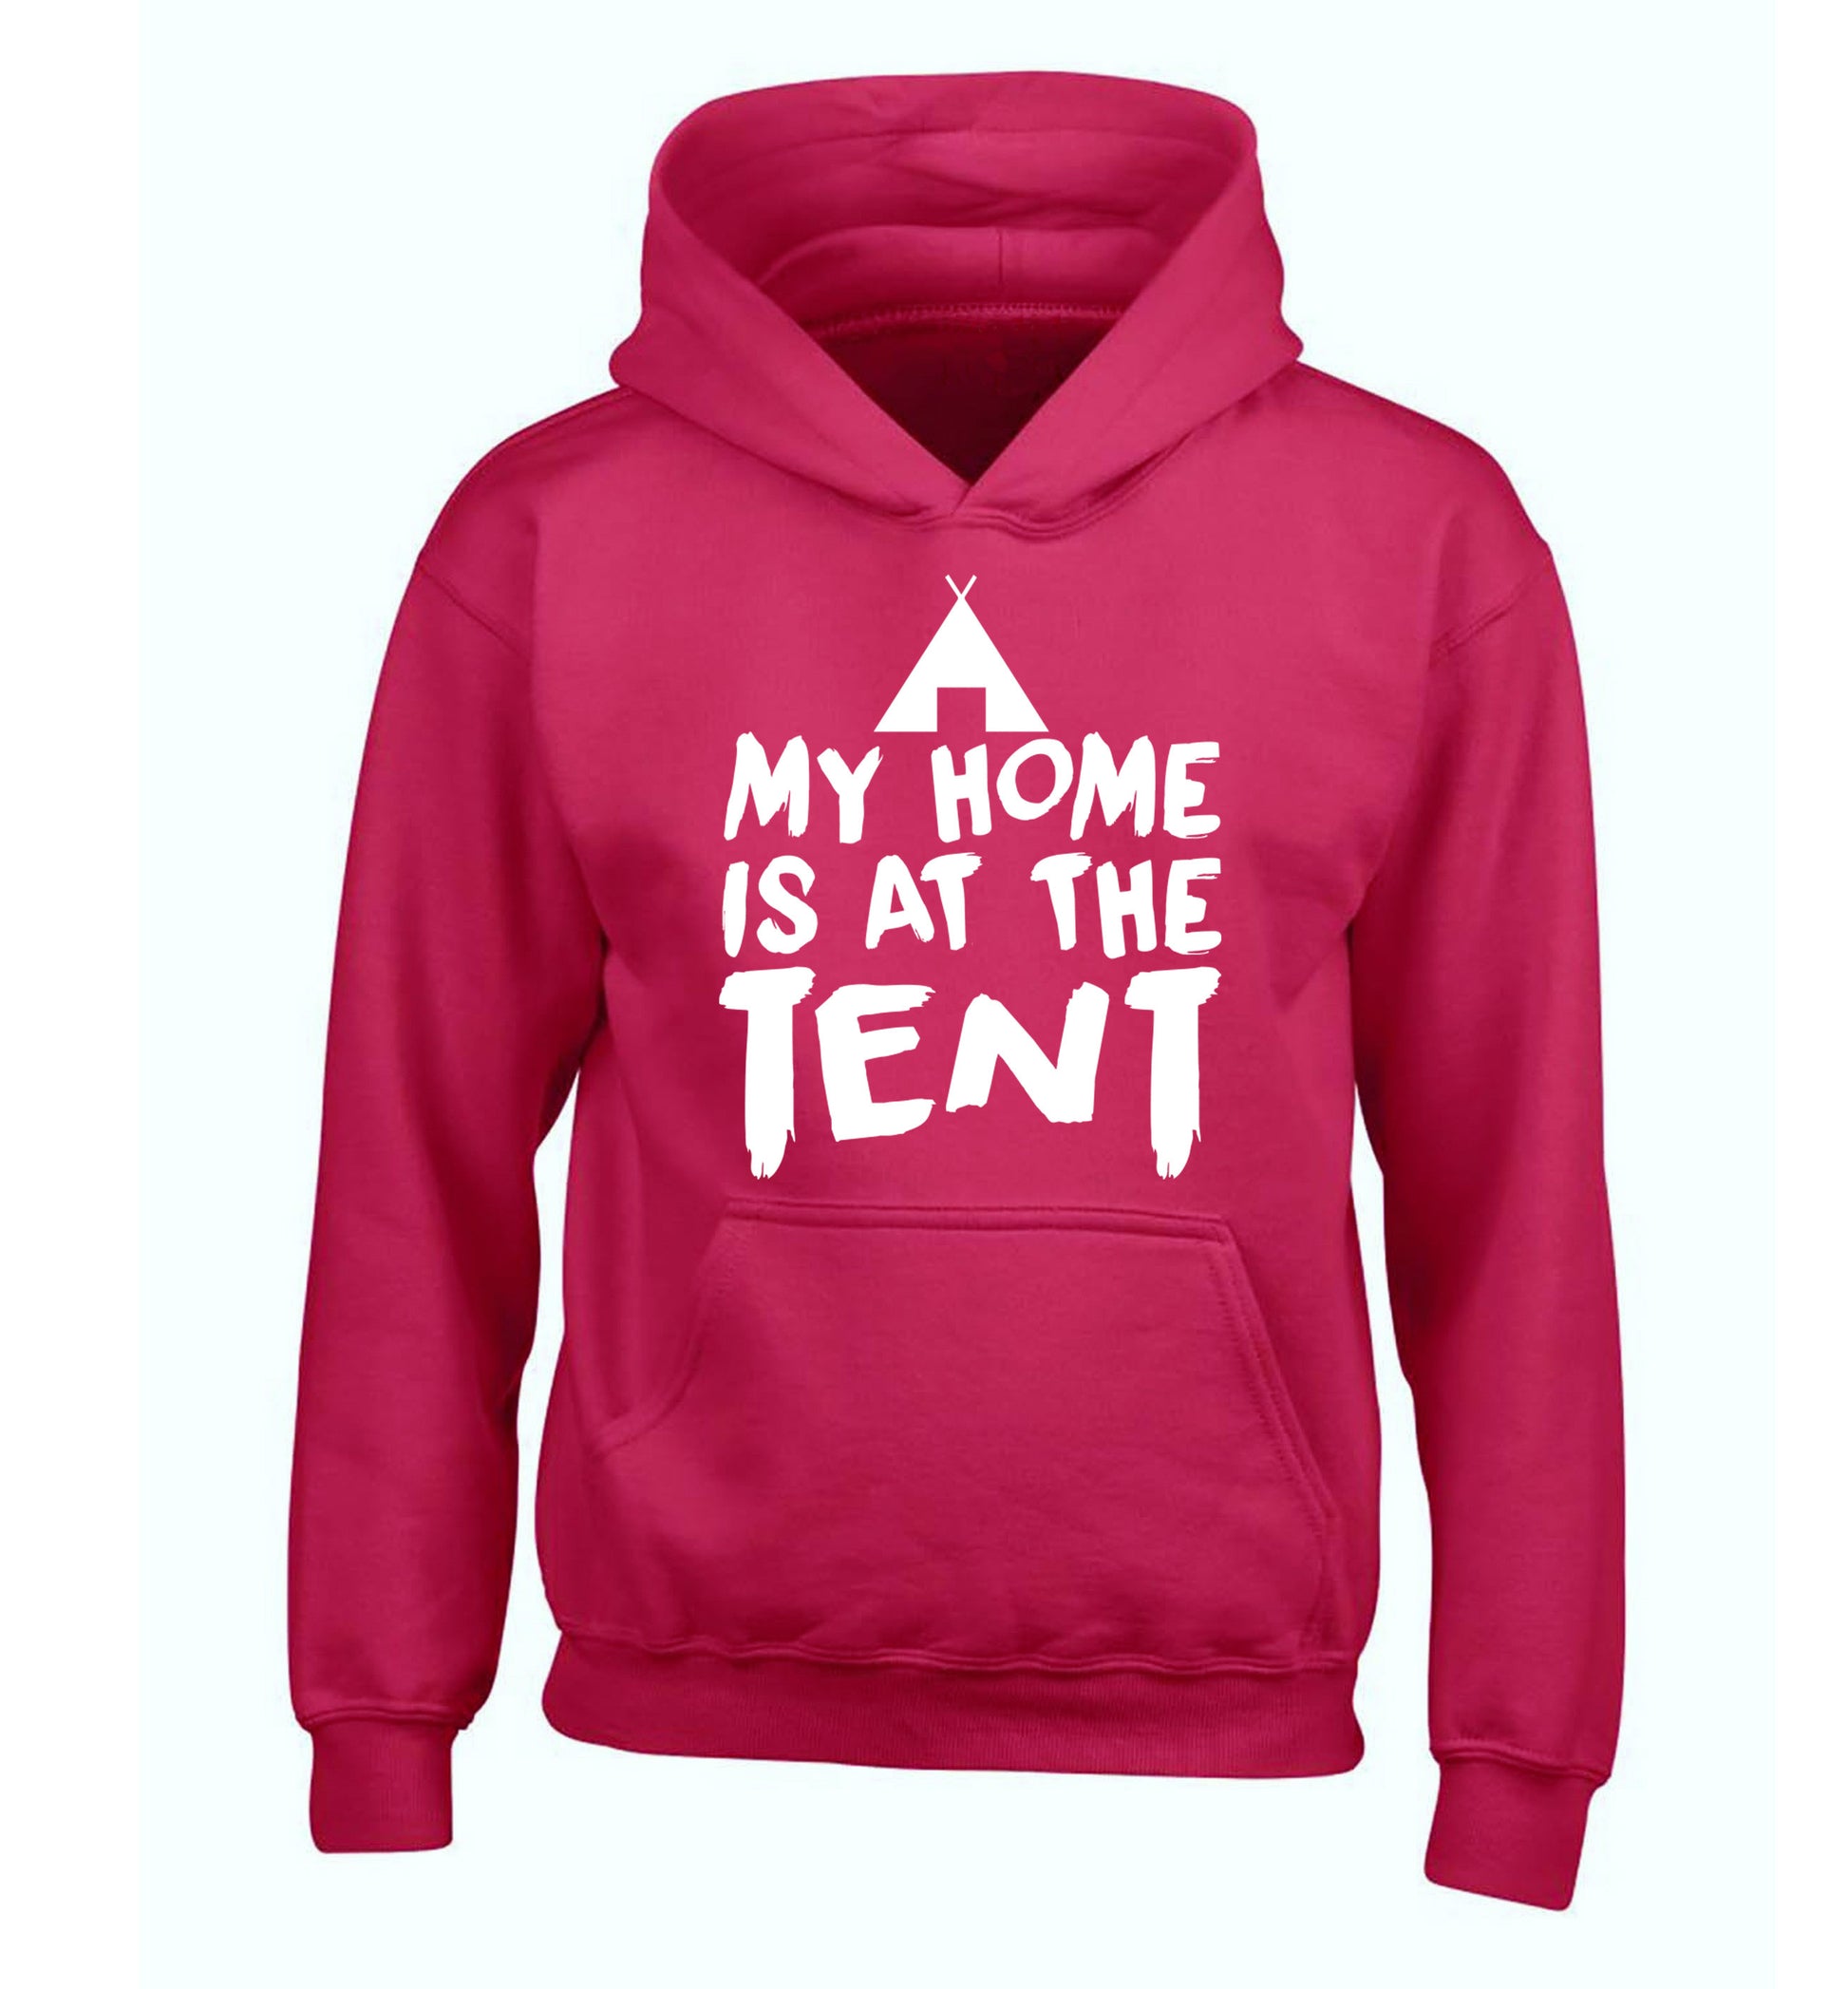 My home is at the tent children's pink hoodie 12-14 Years